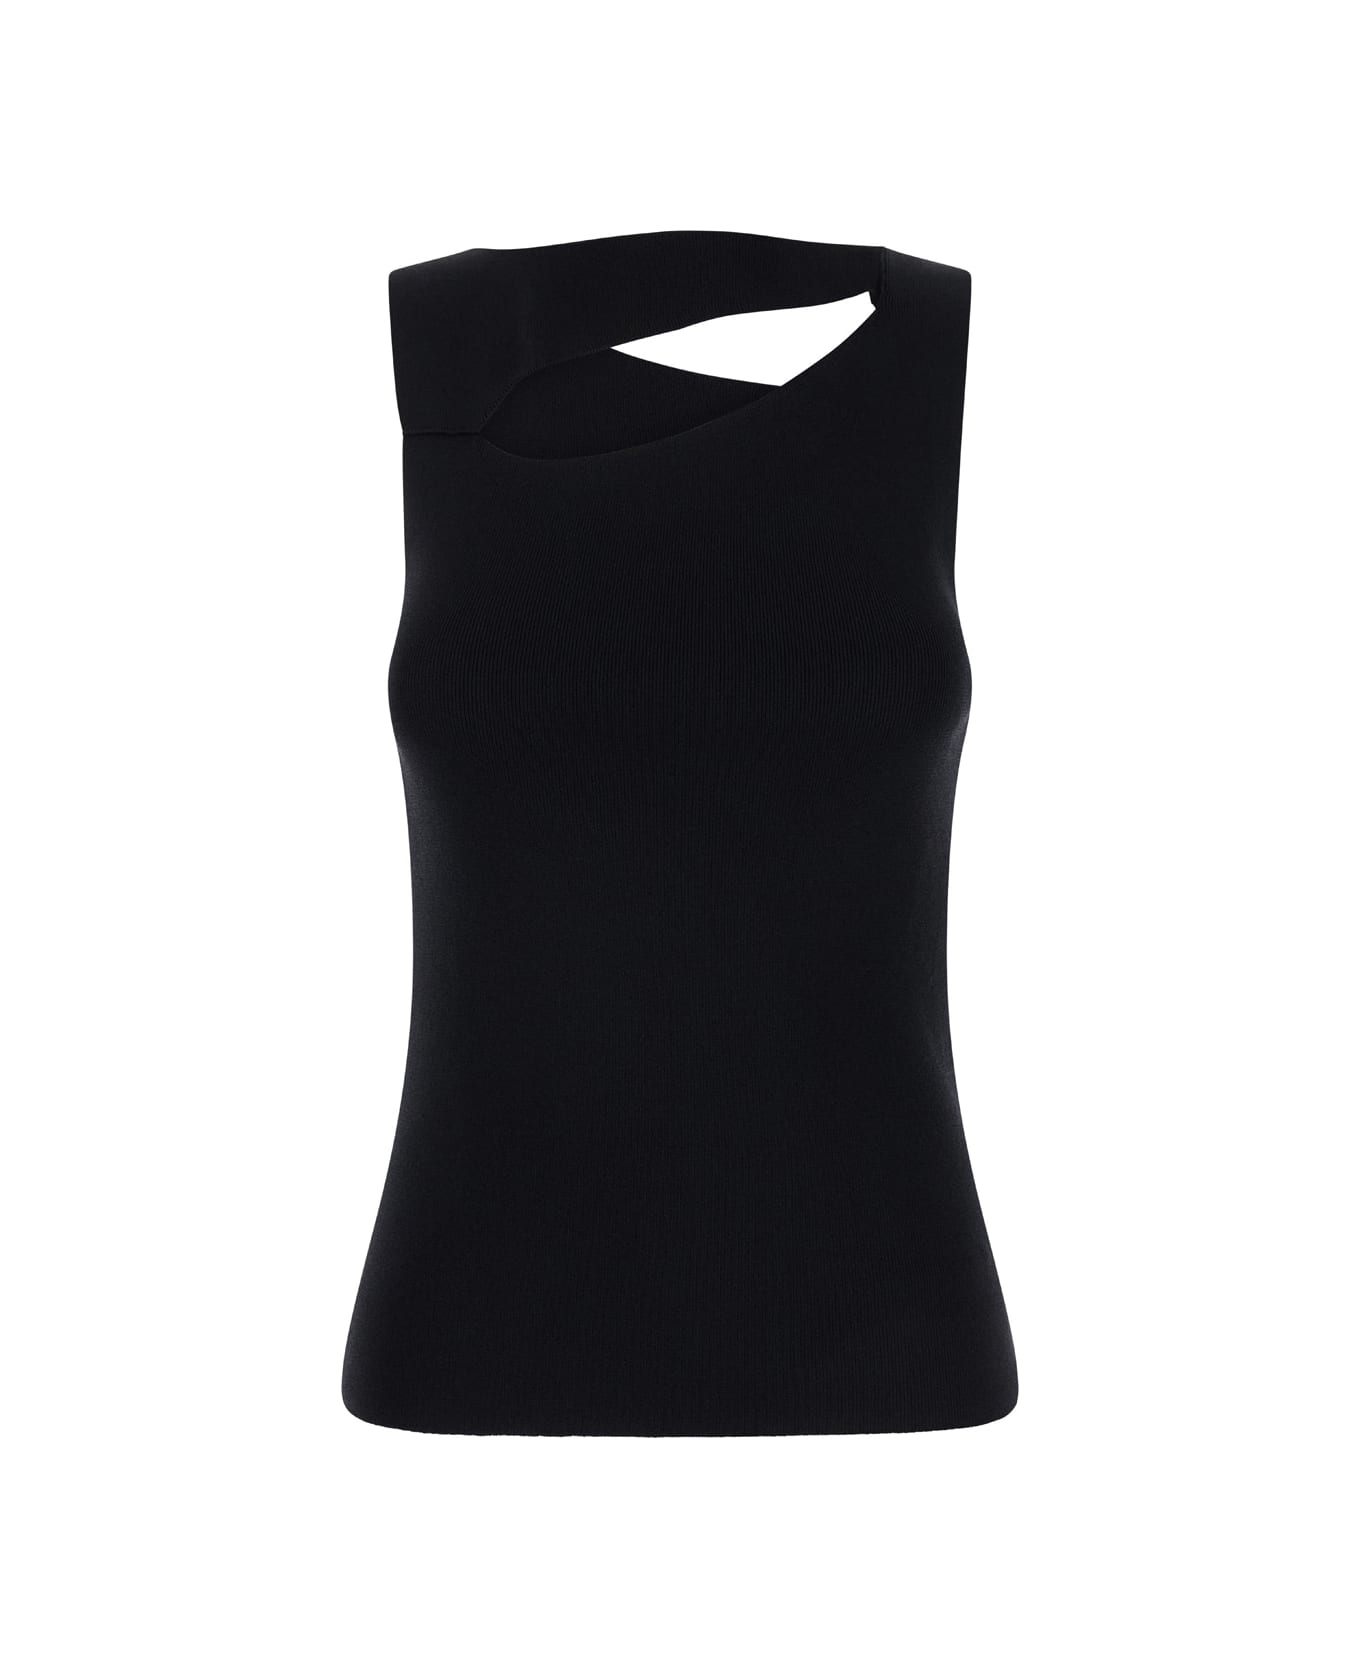 SEMICOUTURE Black Sleeveless Top With Cut-out At The Front And Back In Viscose Blend Woman - Black